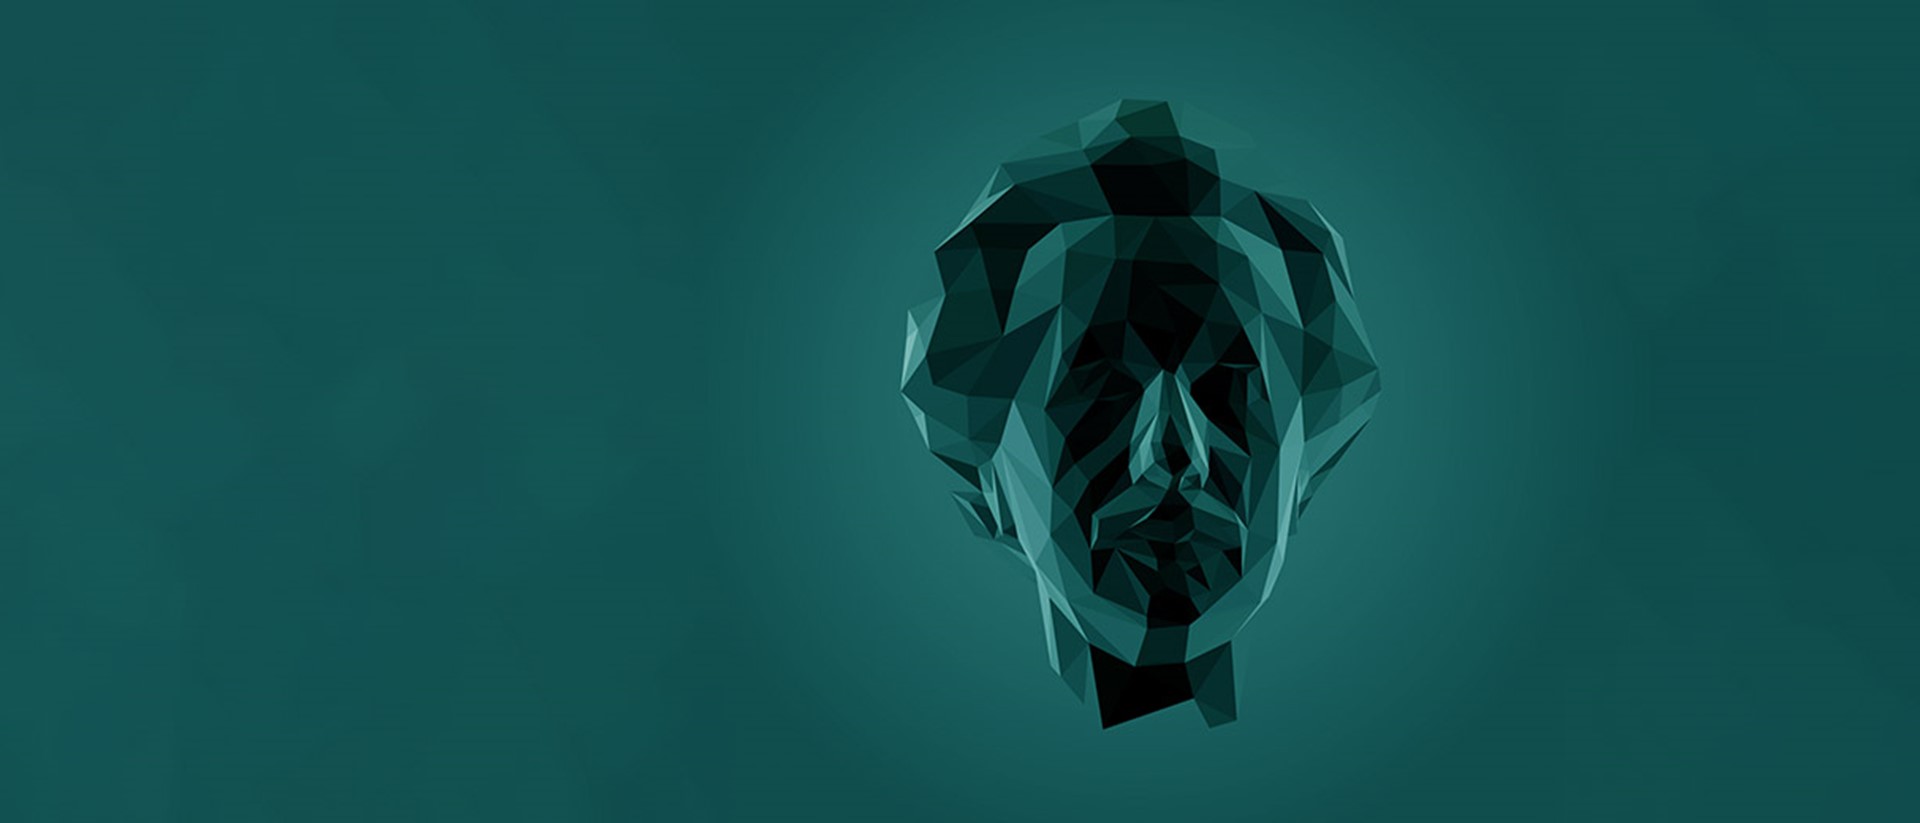 Image of a 3D model based on Alfred Einstein on a teal background